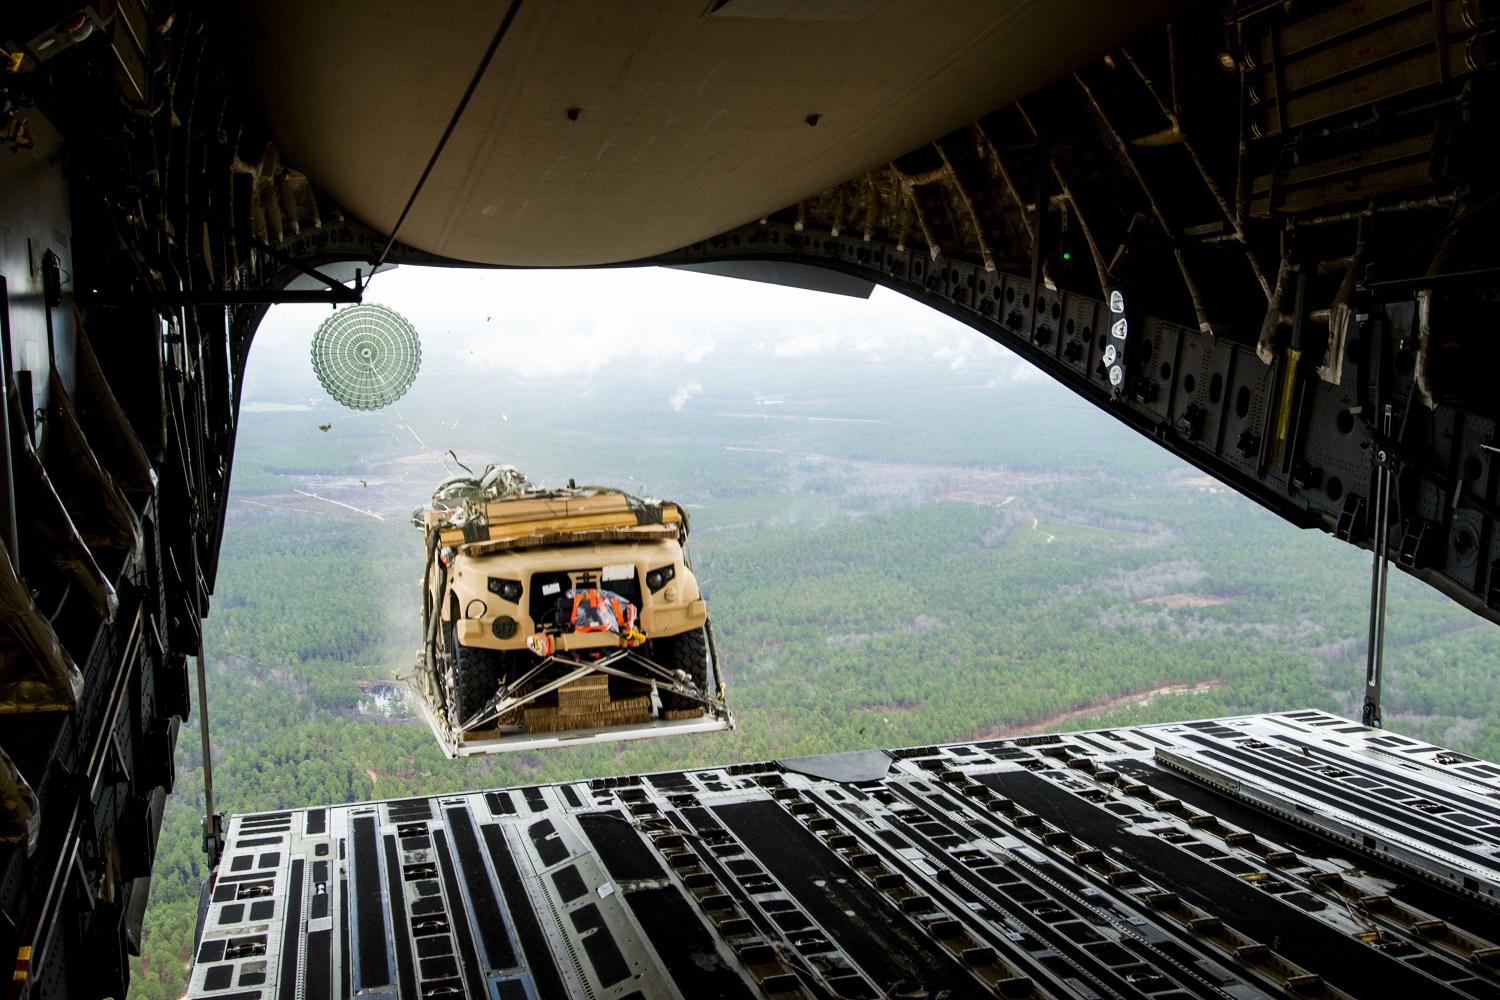 US Army Conduct Airdrop Road Tests of Joint Light Tactical Vehicle (JLTV)